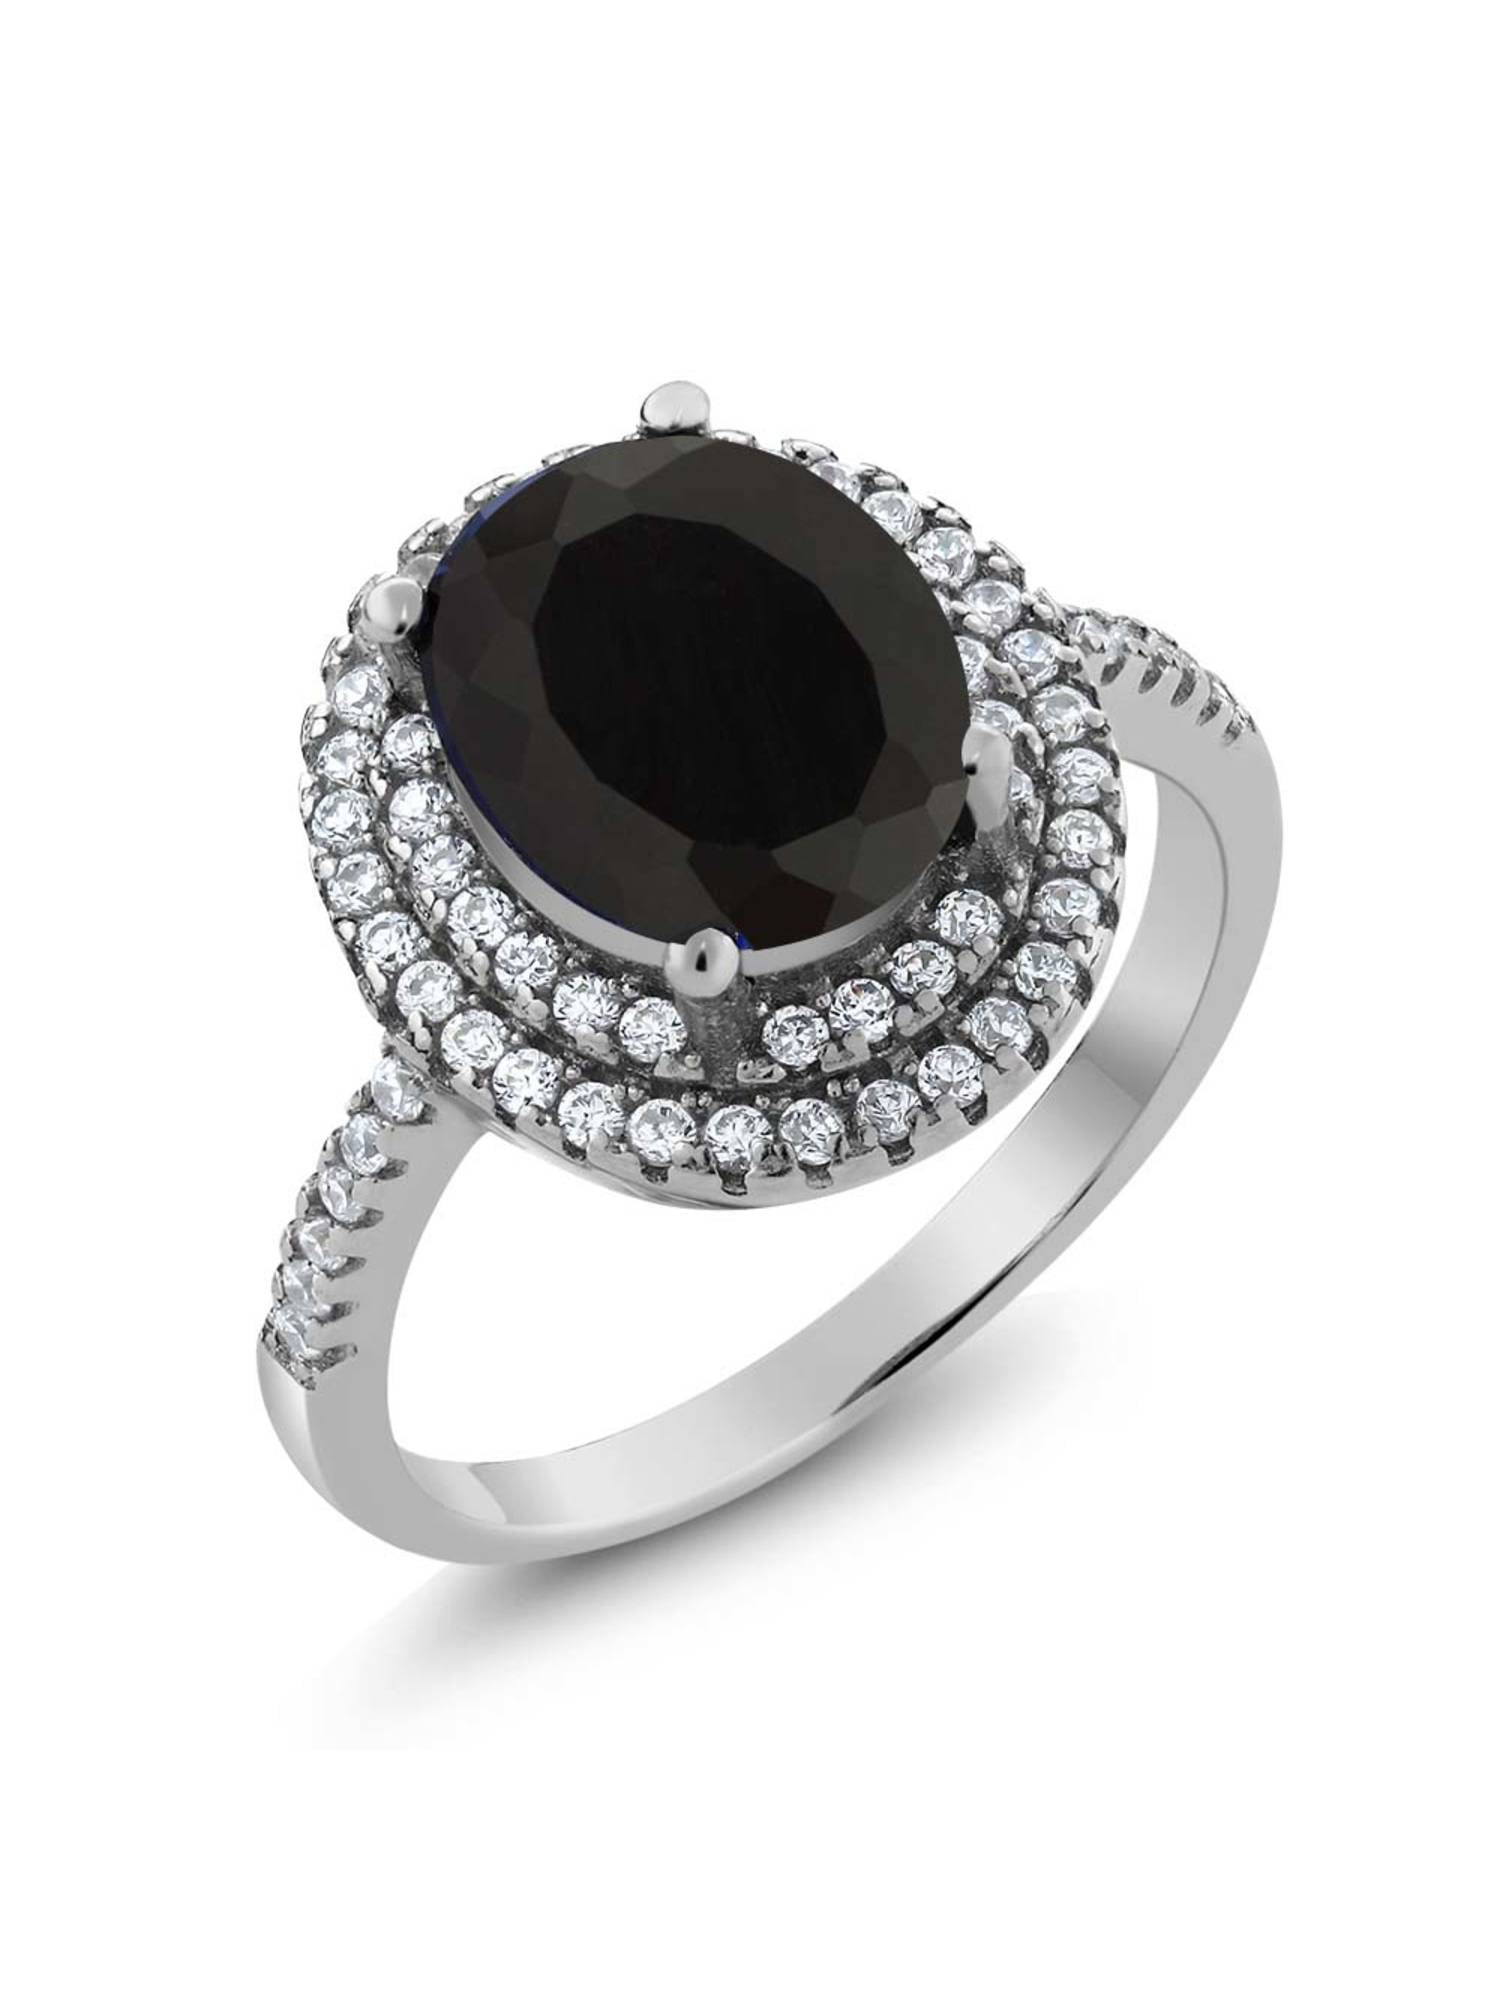 Details about   925 Sterling silver Black Onyx Gemstone Wedding Engagement Ring Gift For Her 